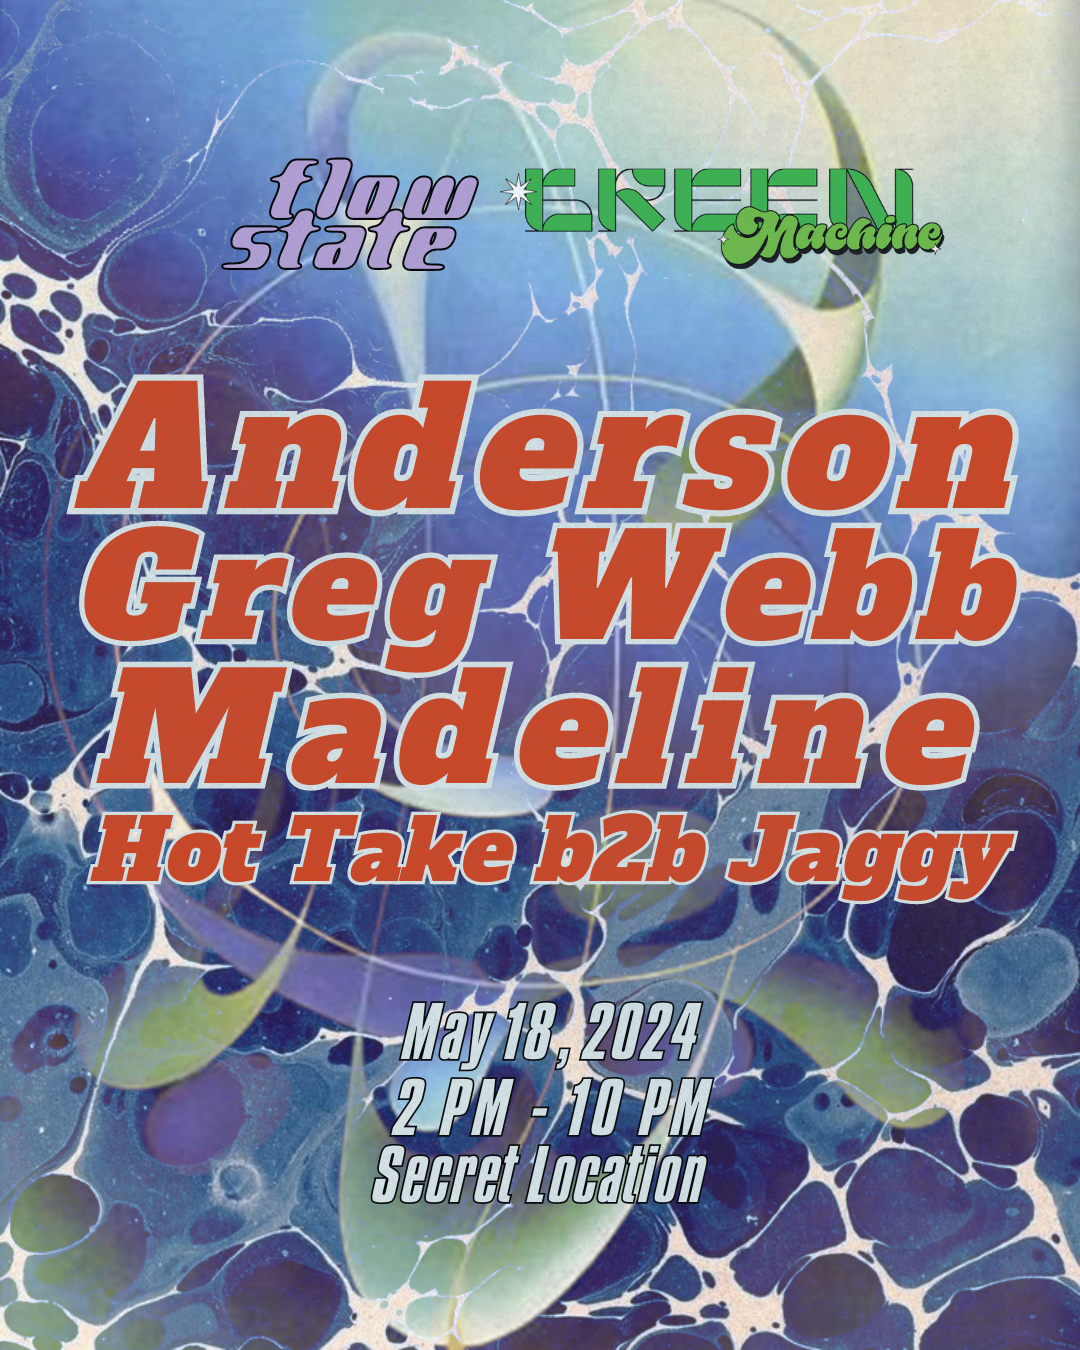 Flow State and Green Machine with Anderson, Greg Webb, Madeline, and Hot Take b2b Jaggy - Página frontal